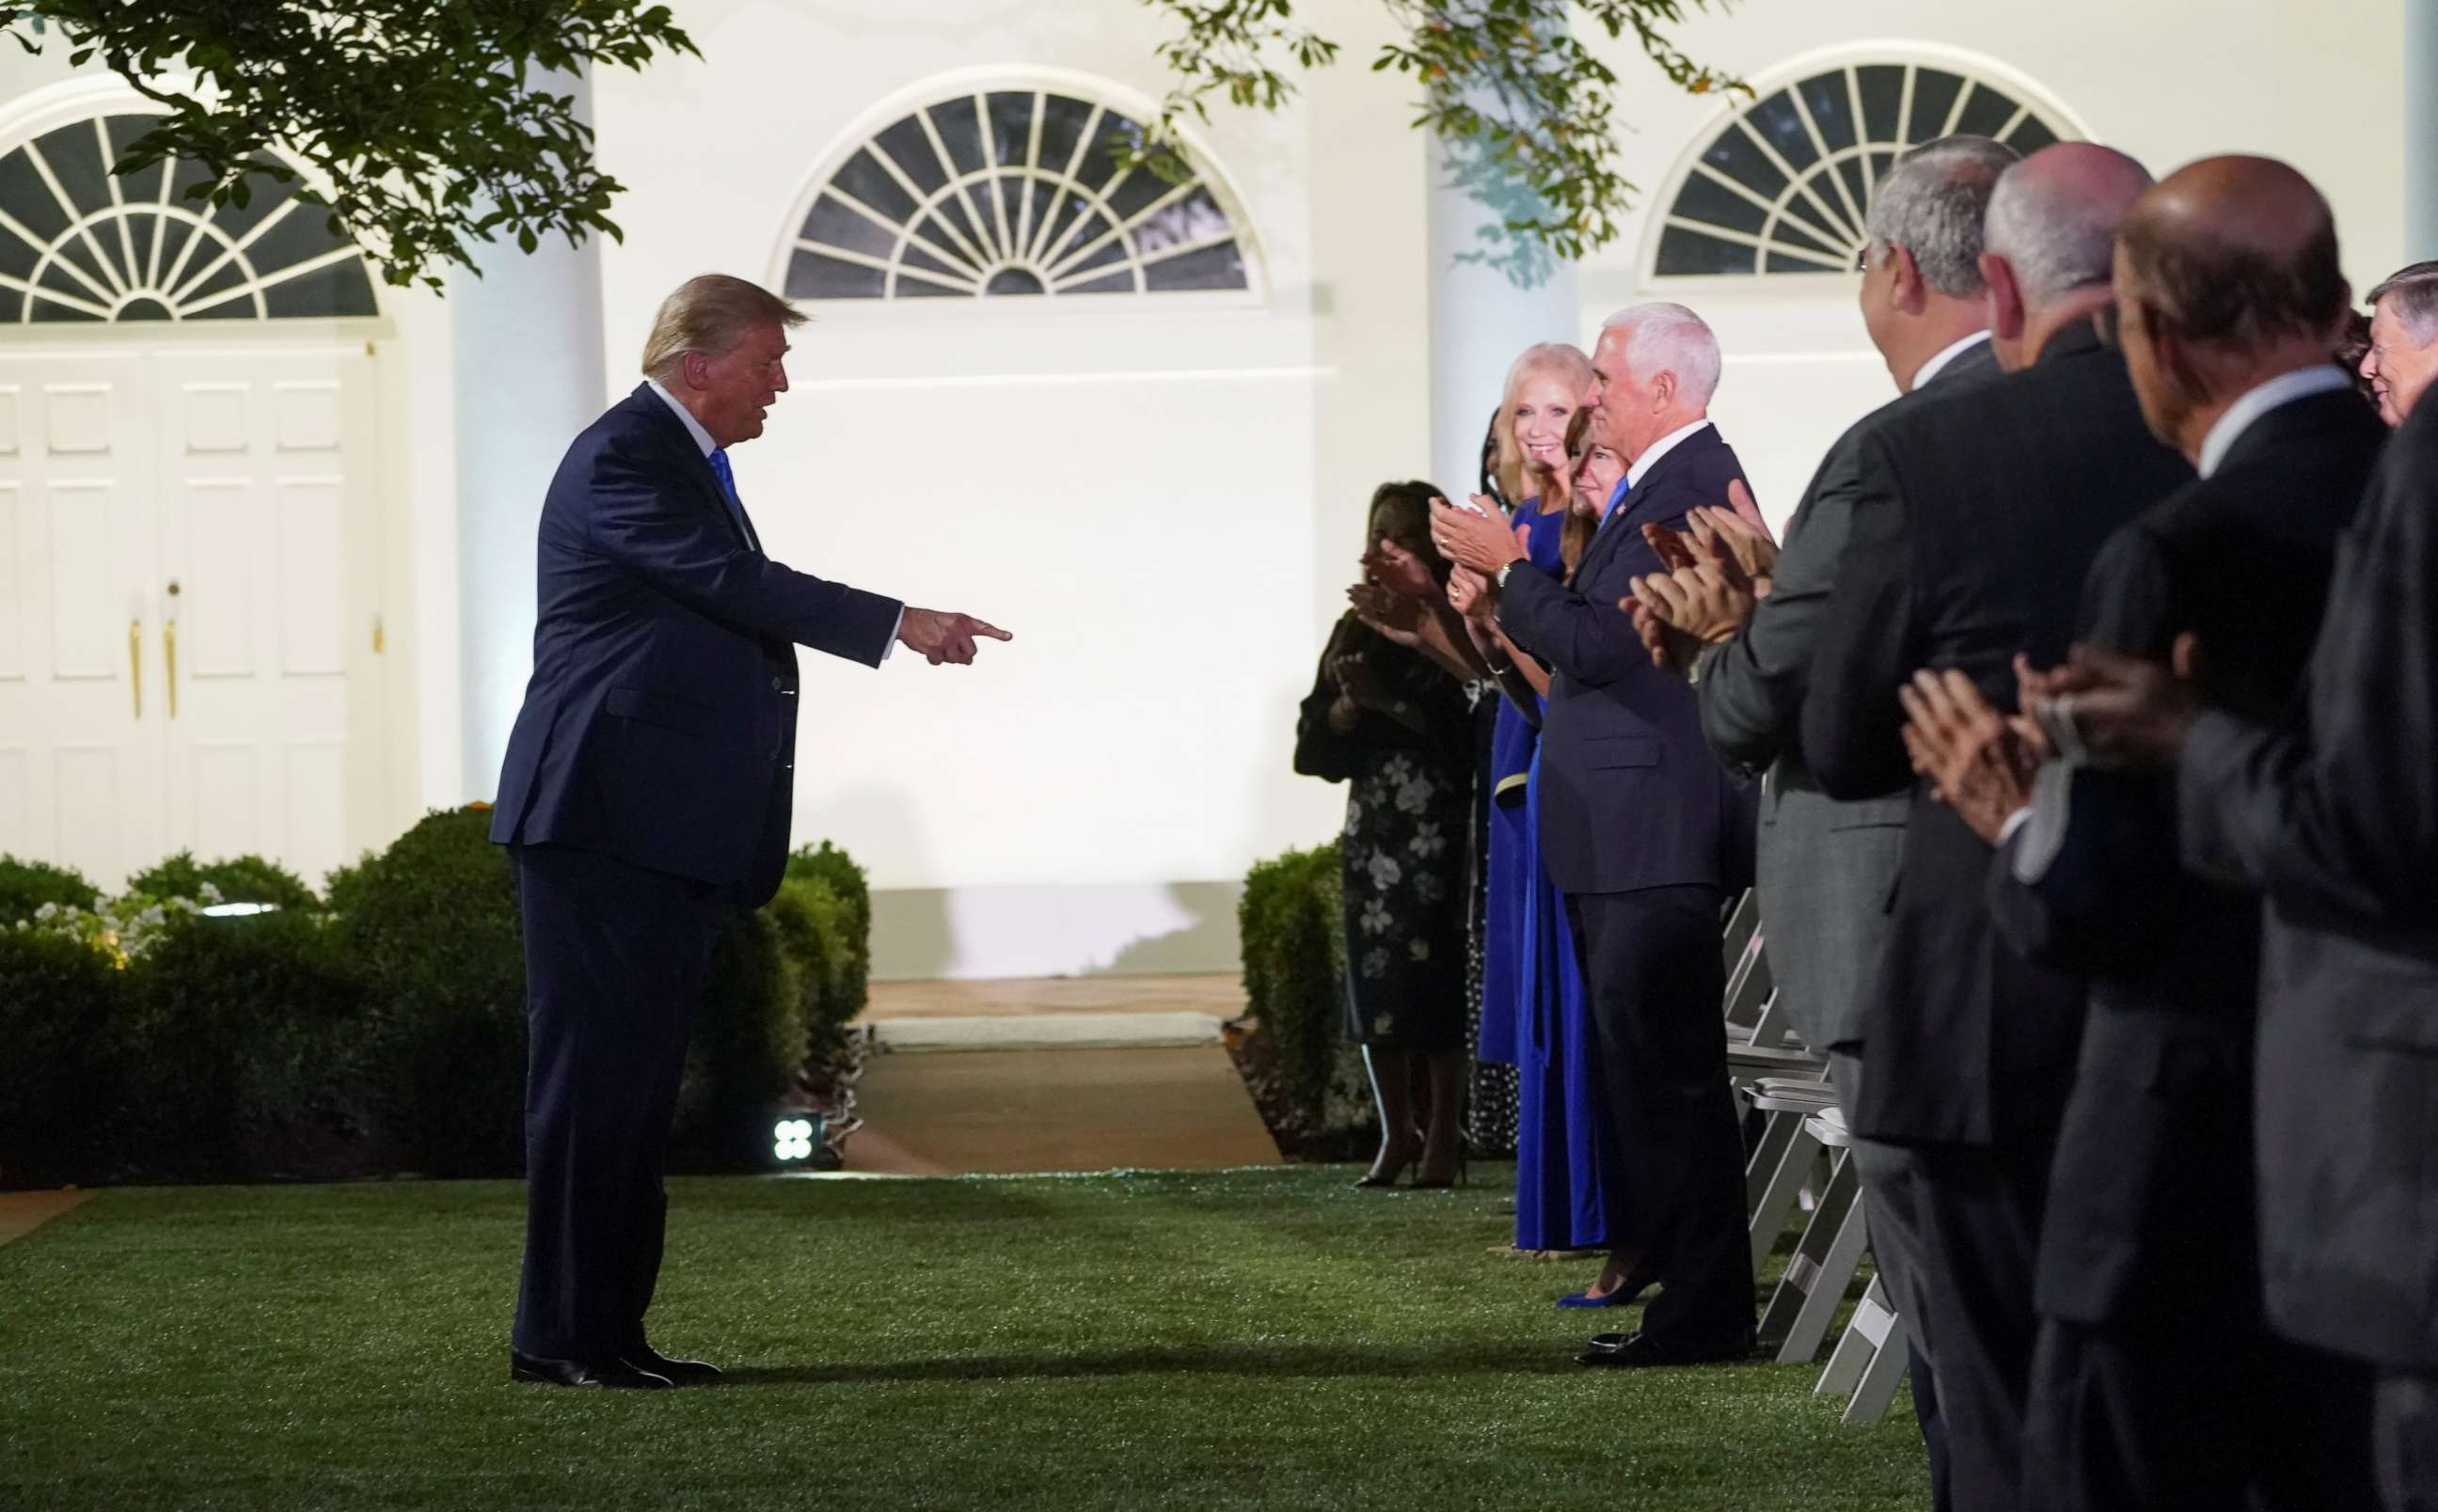 PHOTO: President Donald Trump reacts to applause as he arrives to listen to first lady Melania Trump deliver her live address to 2020 Republican National Convention from the Rose Garden of the White House in Washington, Aug. 25, 2020.